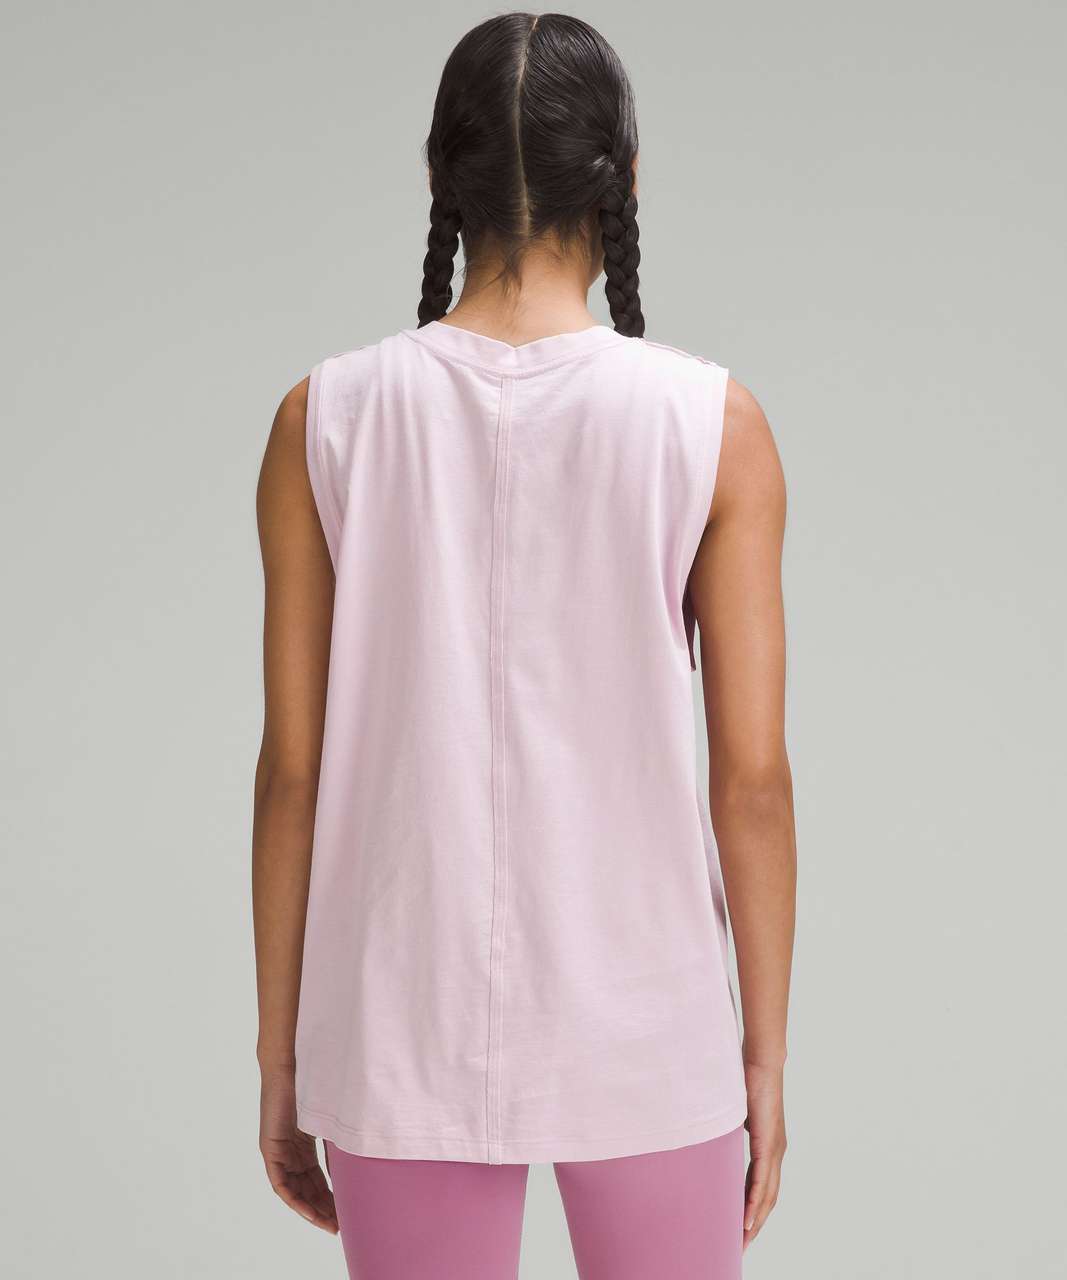 Lululemon All Yours Tank Top - Pink Peony